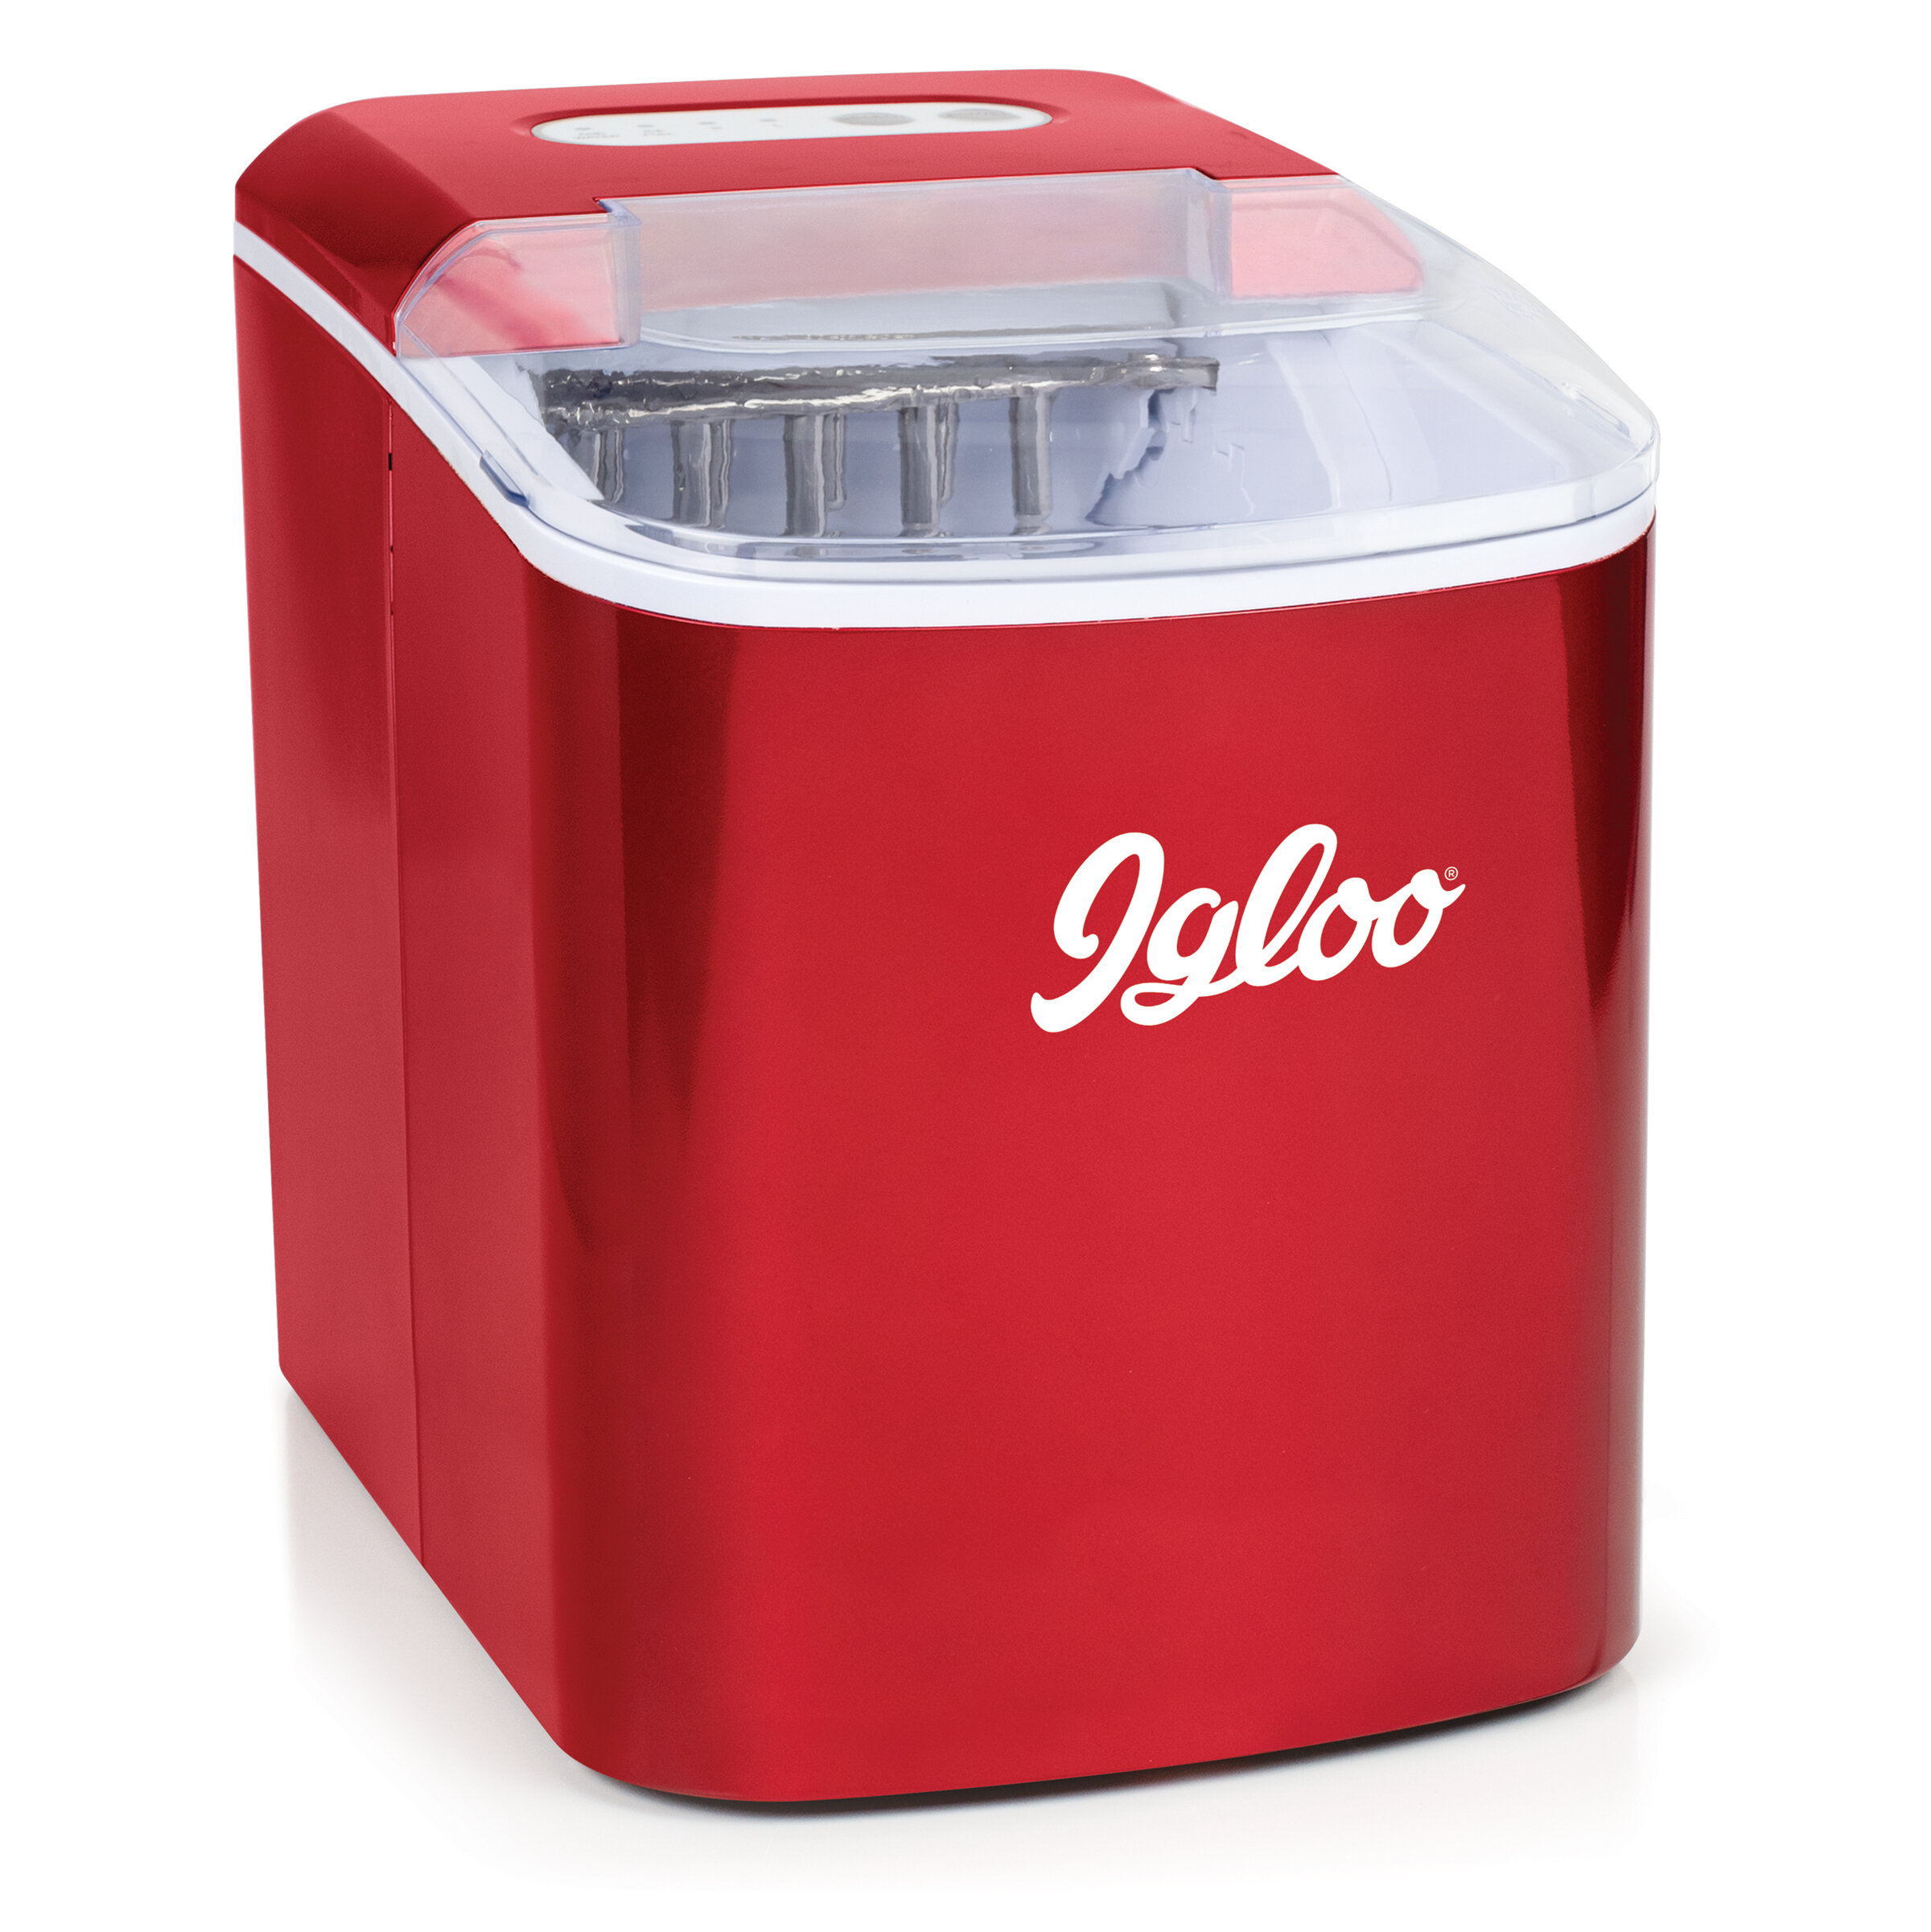 Igloo Automatic Portable Electric Countertop Ice Maker Machine 26